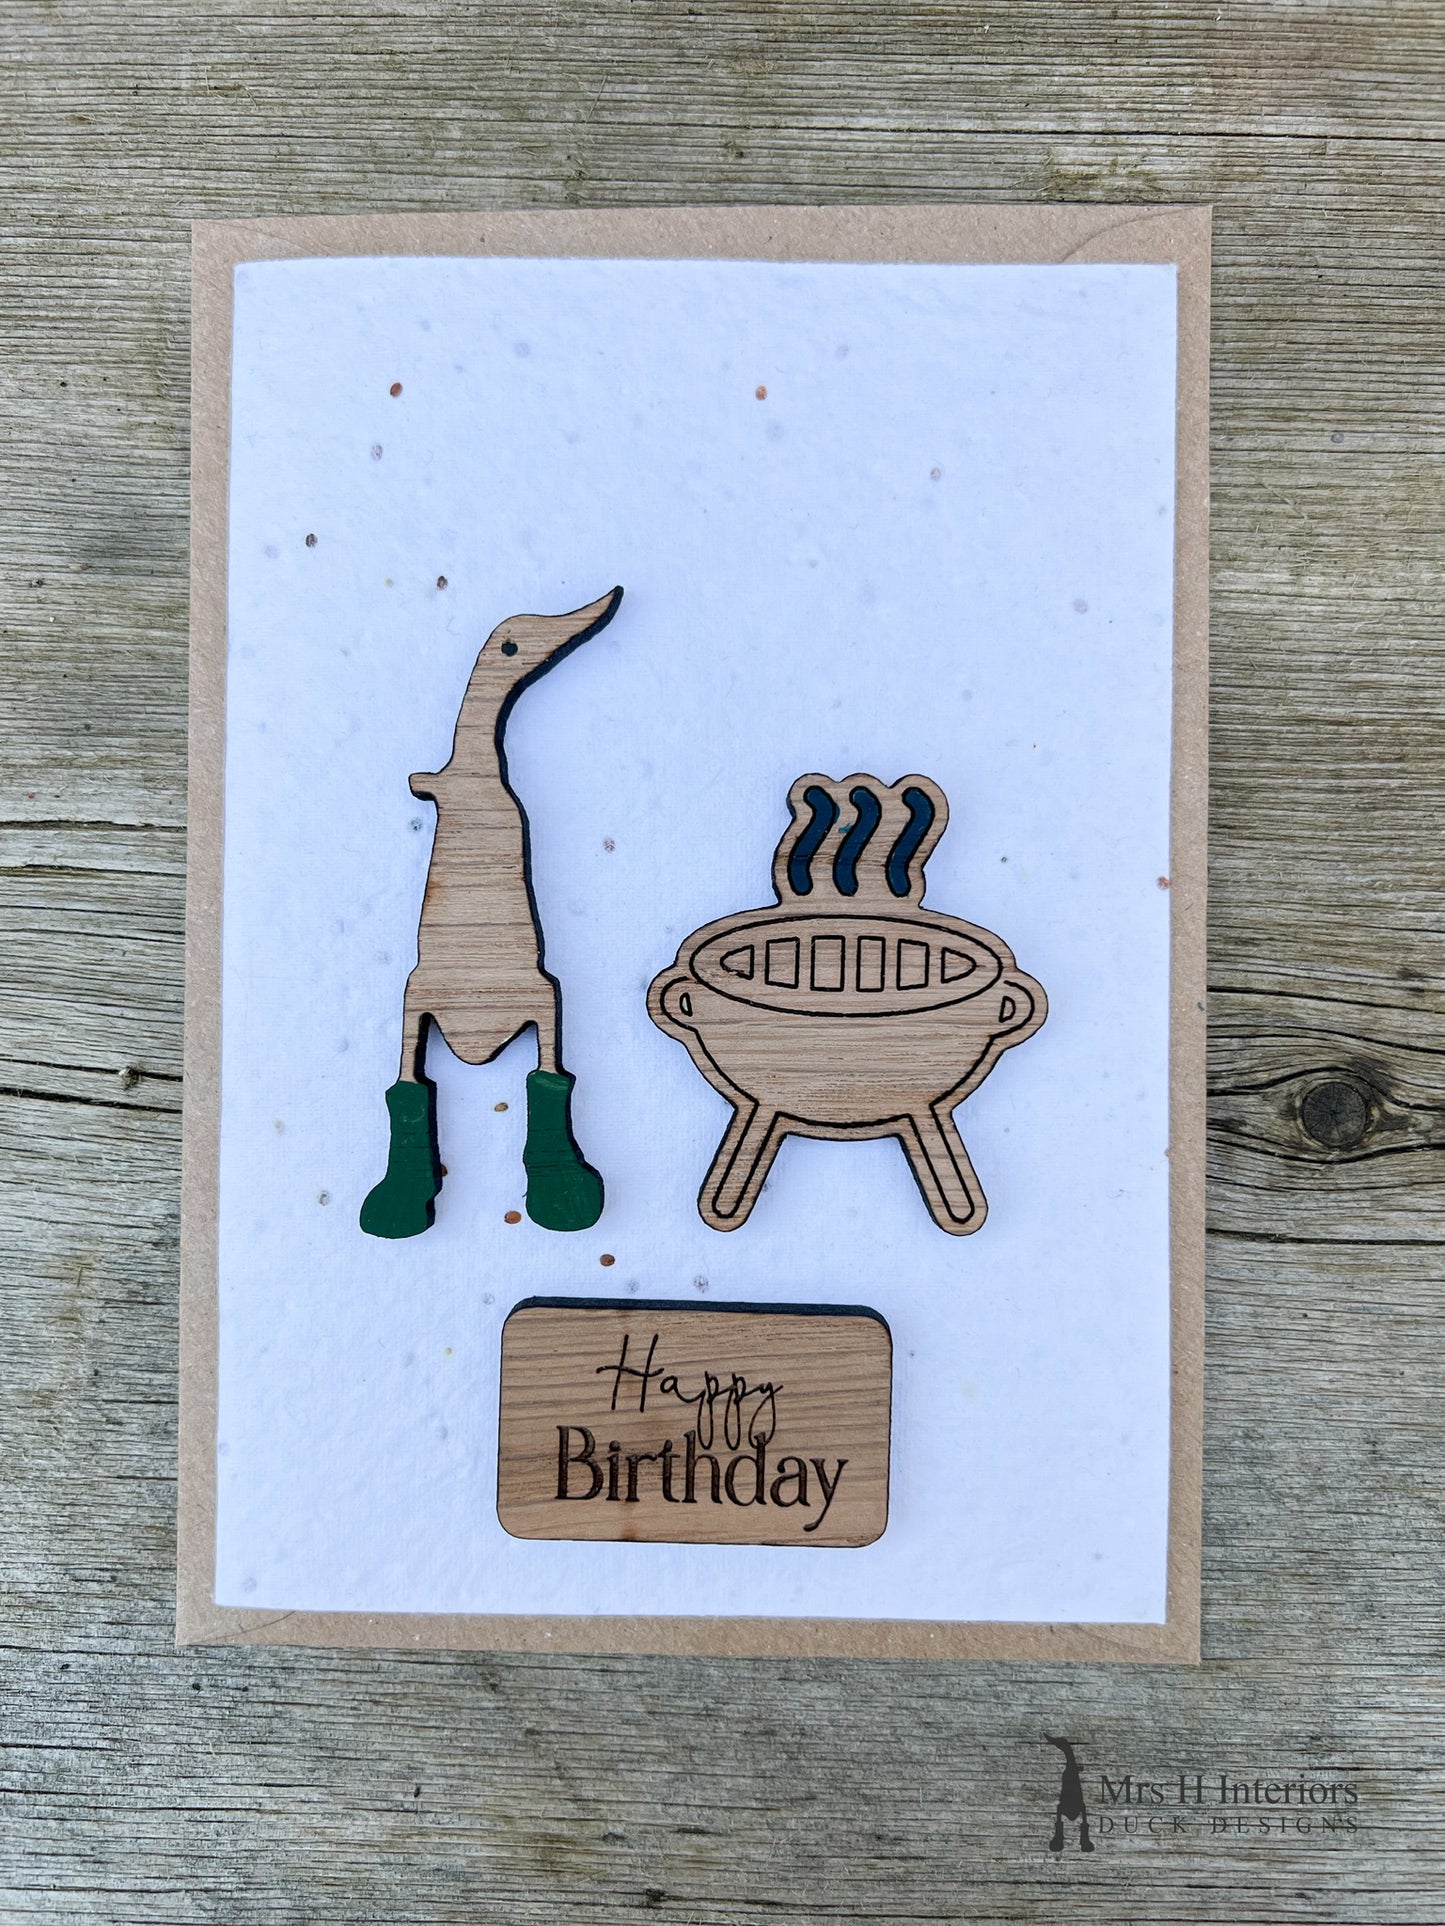 BBQ Birthday Card or Father’s Day Card - Handmade Seed Paper Card with Decorated Wooden Duck in Oak by Mrs H the Duck Lady